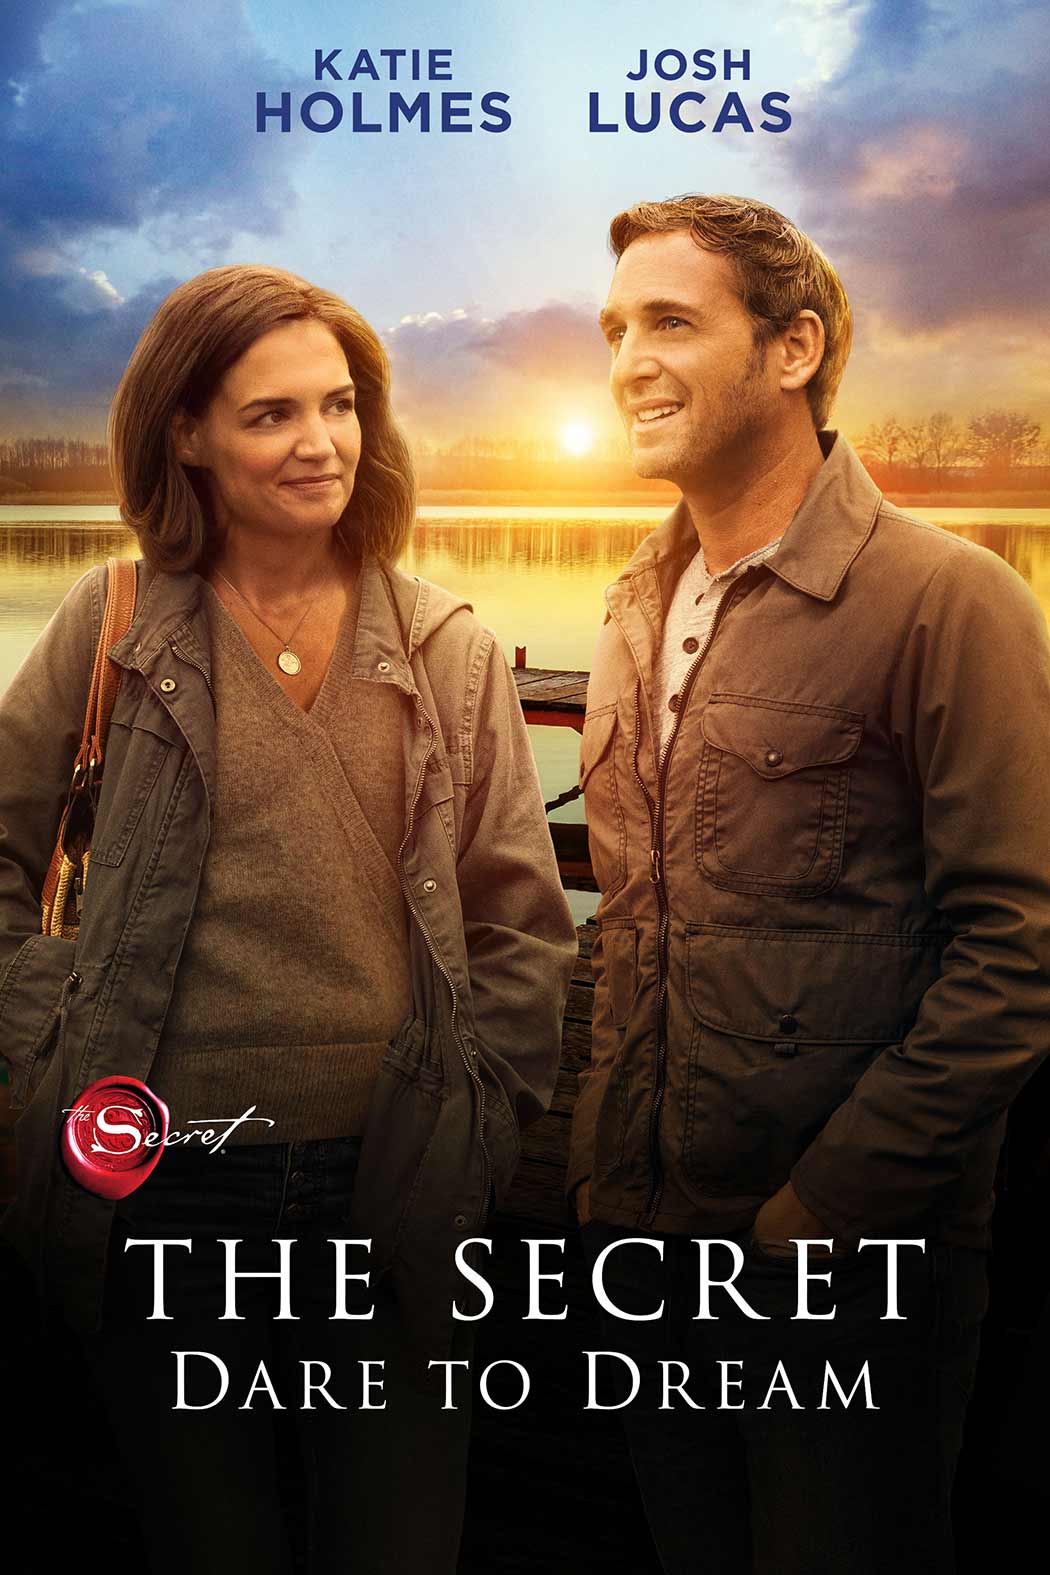 The Secret Movie Review Katie Holmes and Josh Lucas